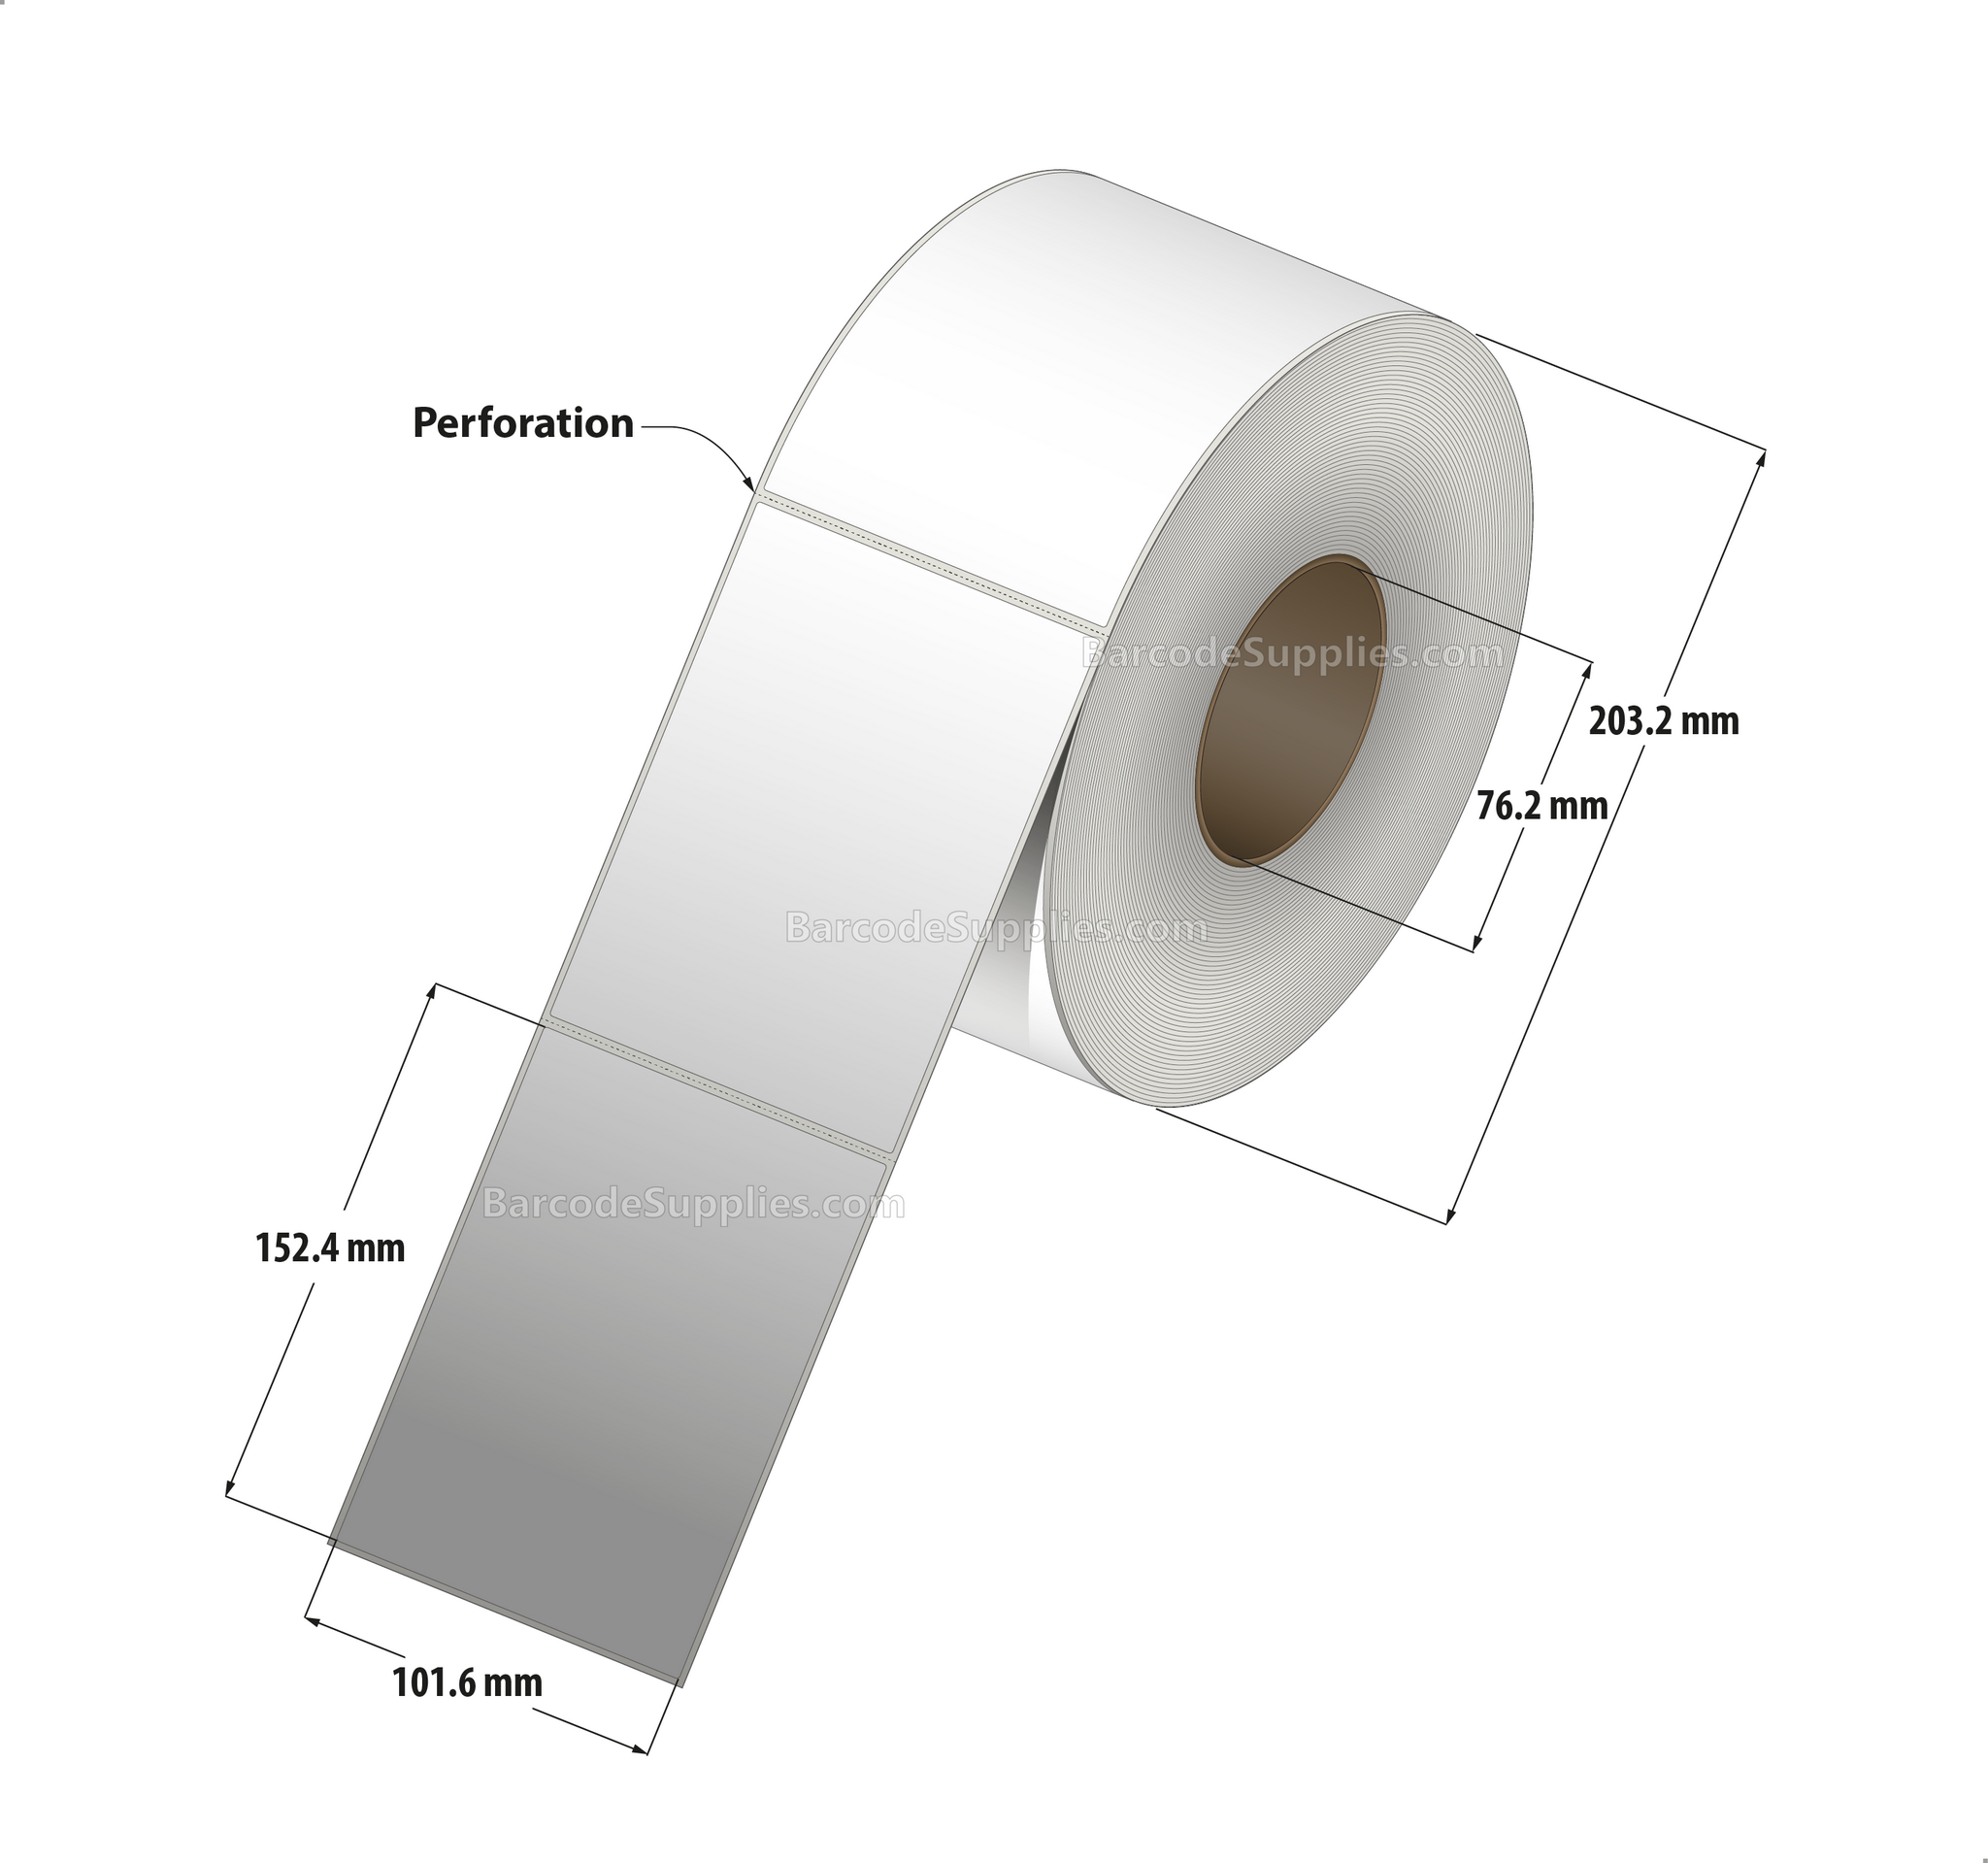 4 x 6 Direct Thermal White Labels With Acrylic Adhesive - Perforated - 1000 Labels Per Roll - Carton Of 4 Rolls - 4000 Labels Total - MPN: RD-4-6-1000-3 - BarcodeSource, Inc.